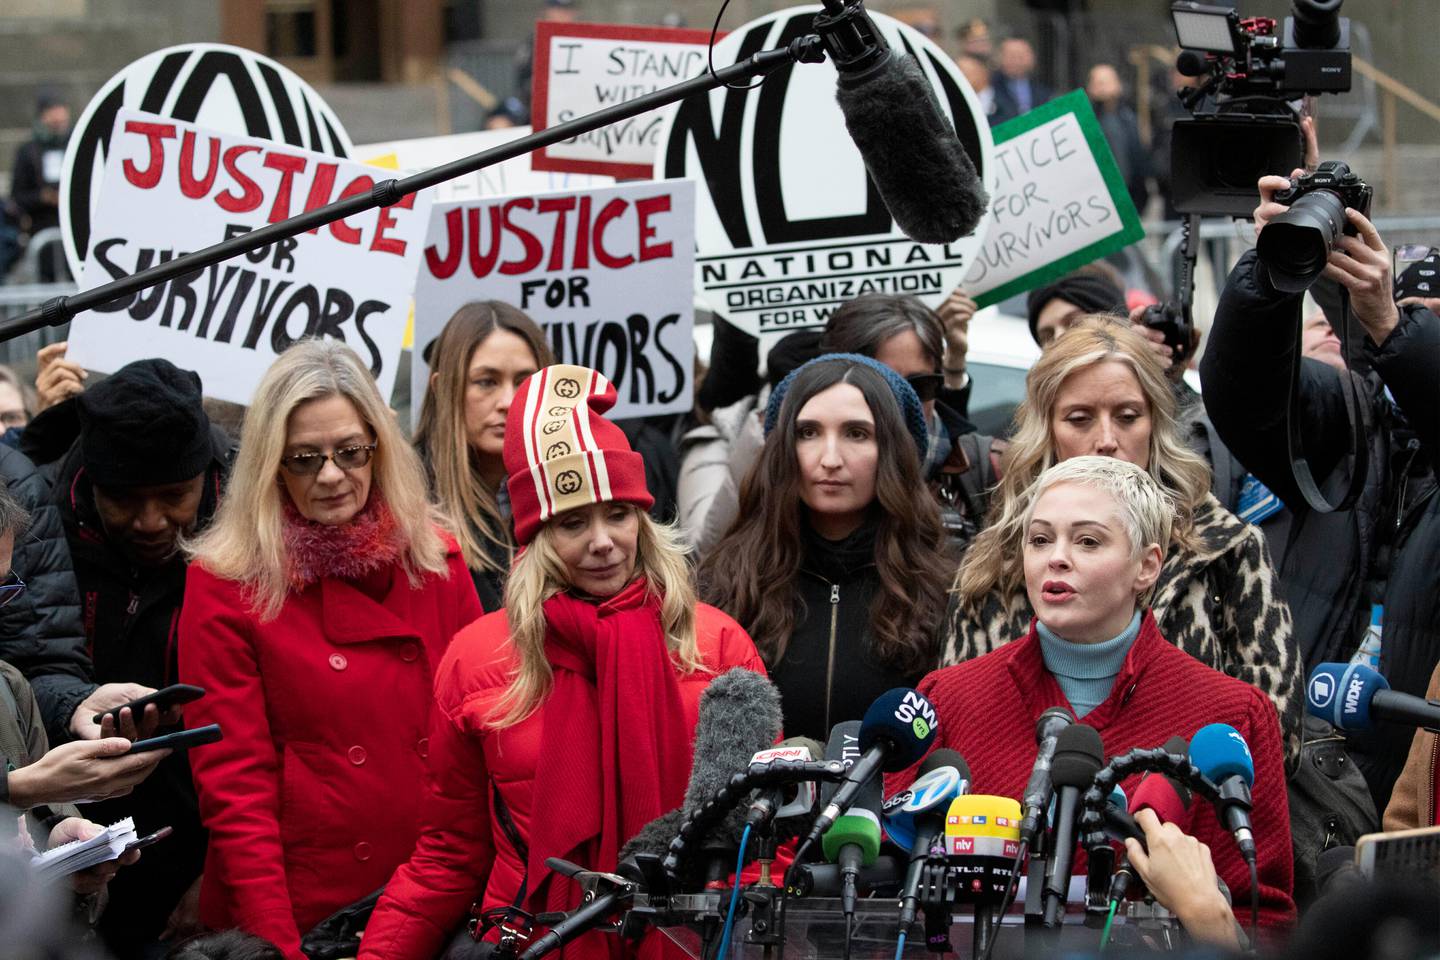 FILE - In this Jan. 6, 2020, file photo, Actor Rose McGowan, right, speaks at a news conference as actor Rosanna Arquette, center left, listens outside a Manhattan courthouse after the arrival of Harvey Weinstein in New York. (AP Photo/Mark Lennihan, File)